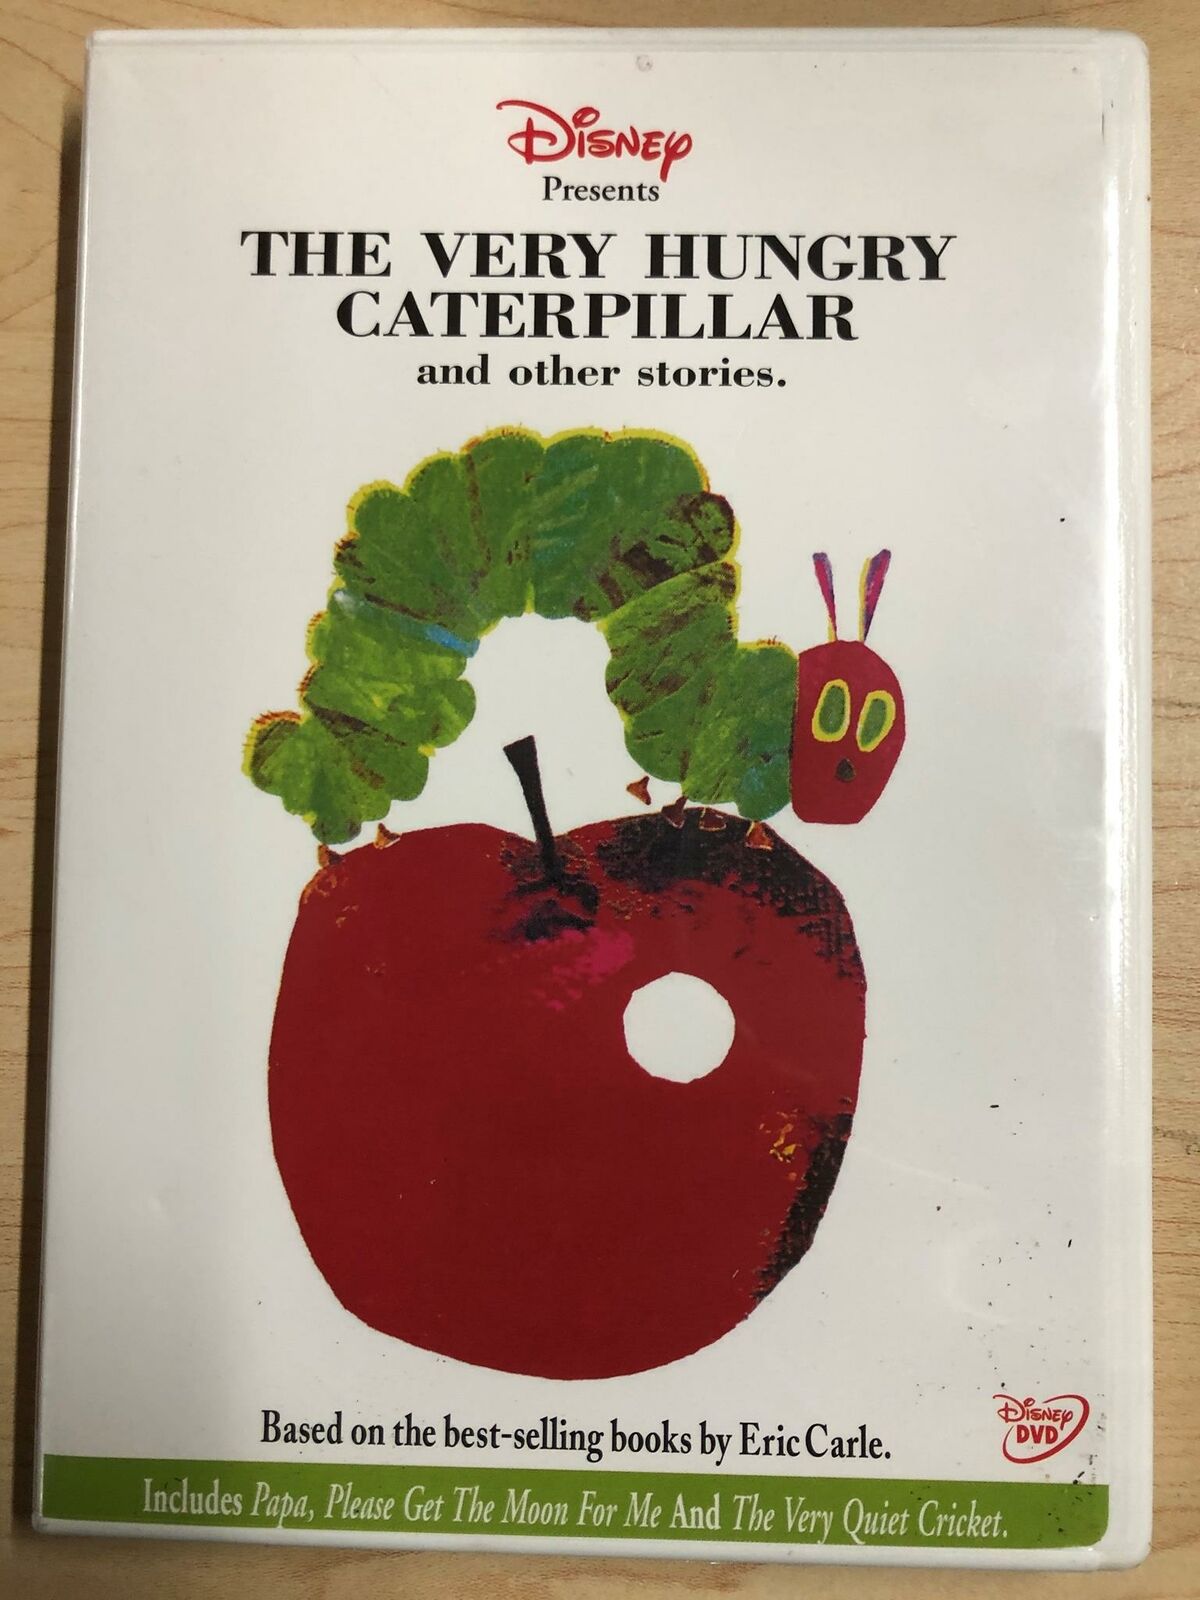 The Very Hungry Caterpillar and Other Stories (DVD, Disney, 2006) - G1122